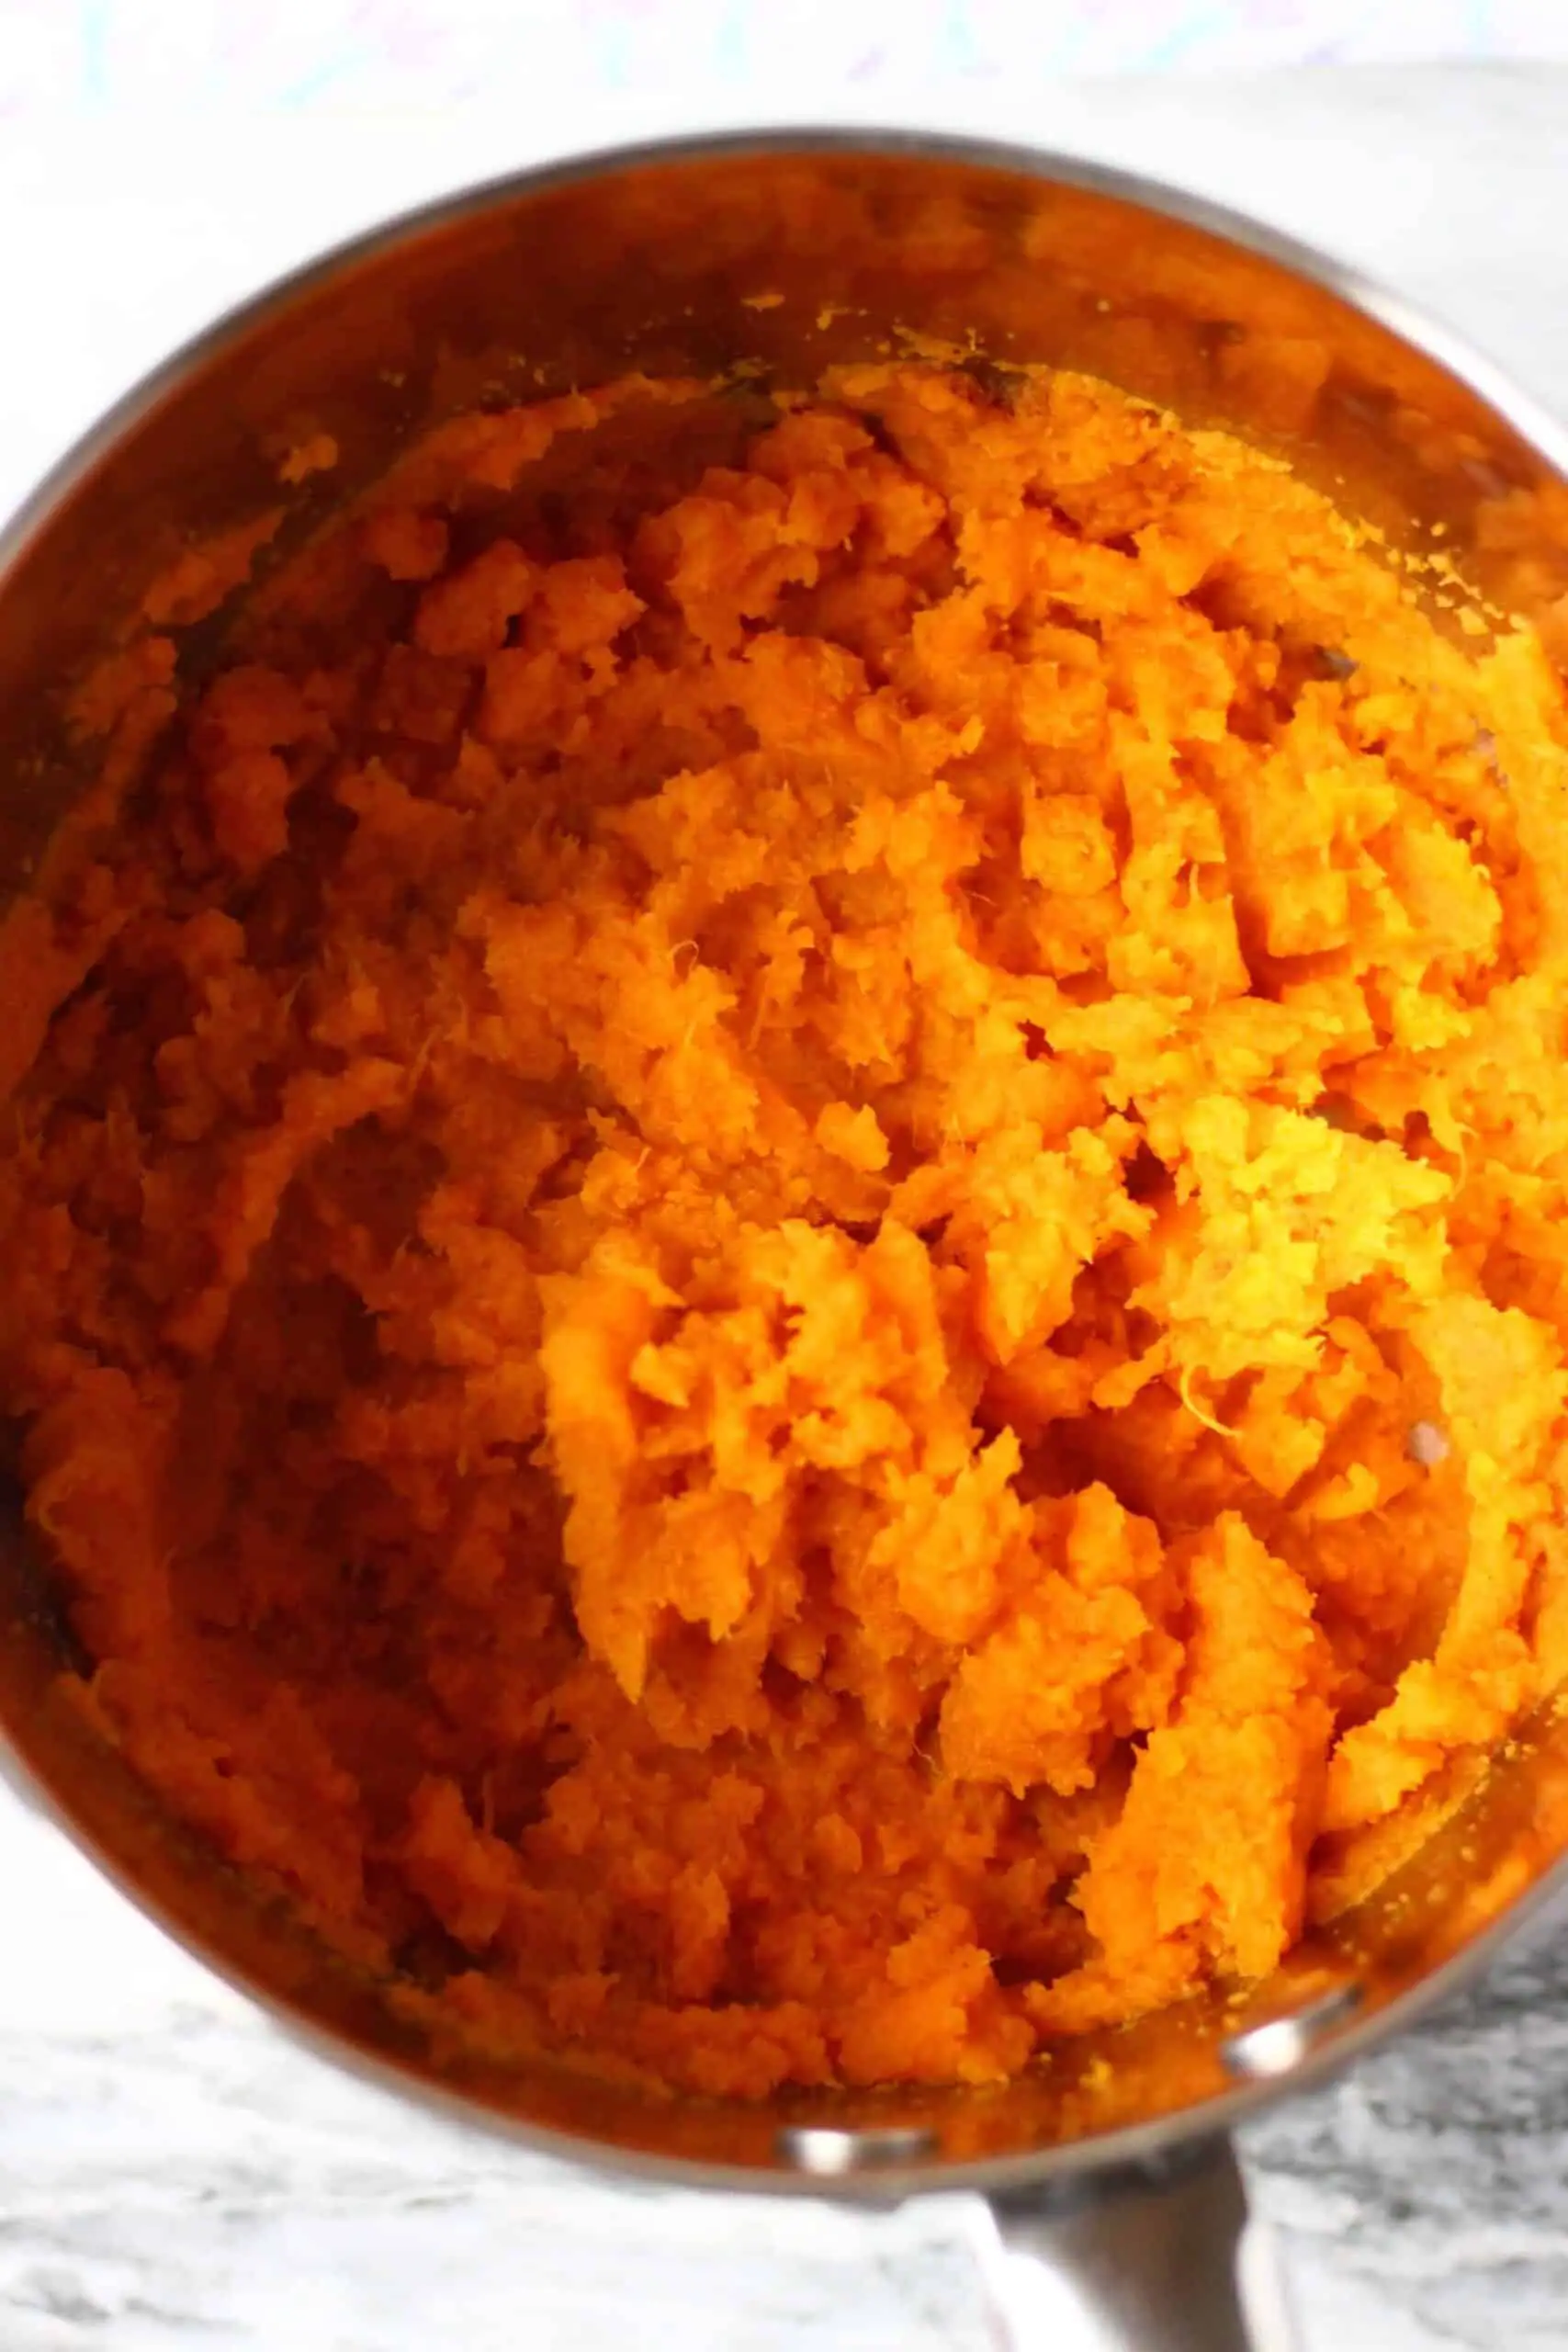 Mashed sweet potatoes in a pan